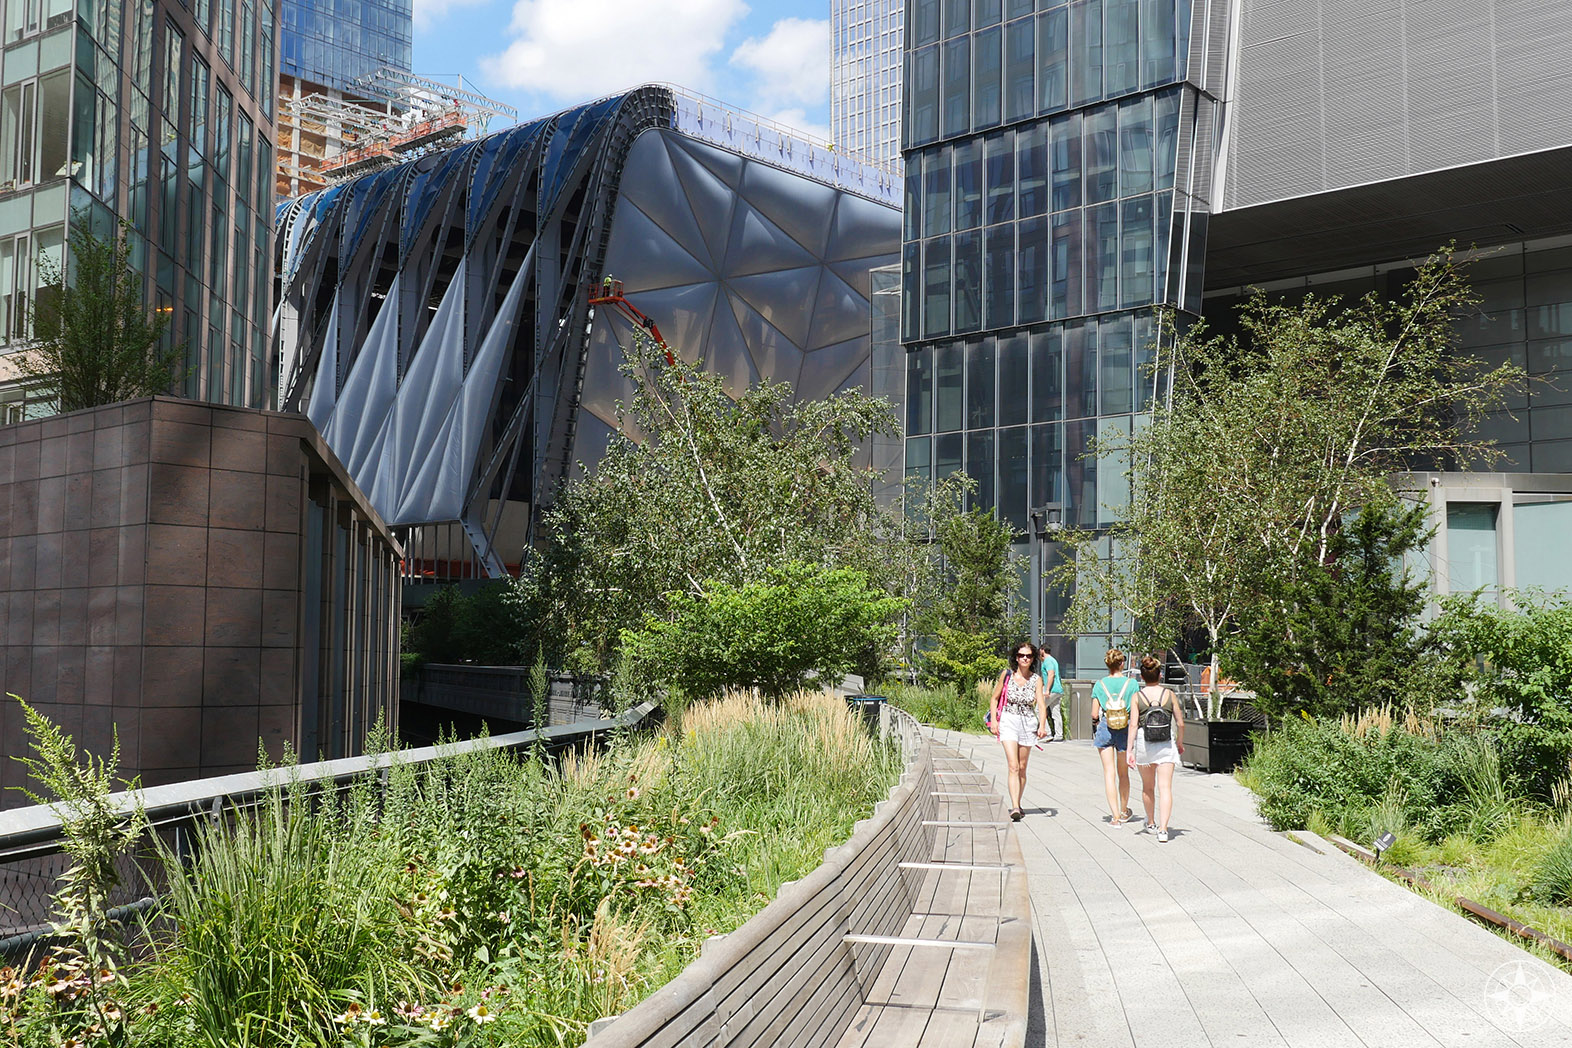 The High Line takes a turn to wind around the new Hudson Yards development and the old rail yard